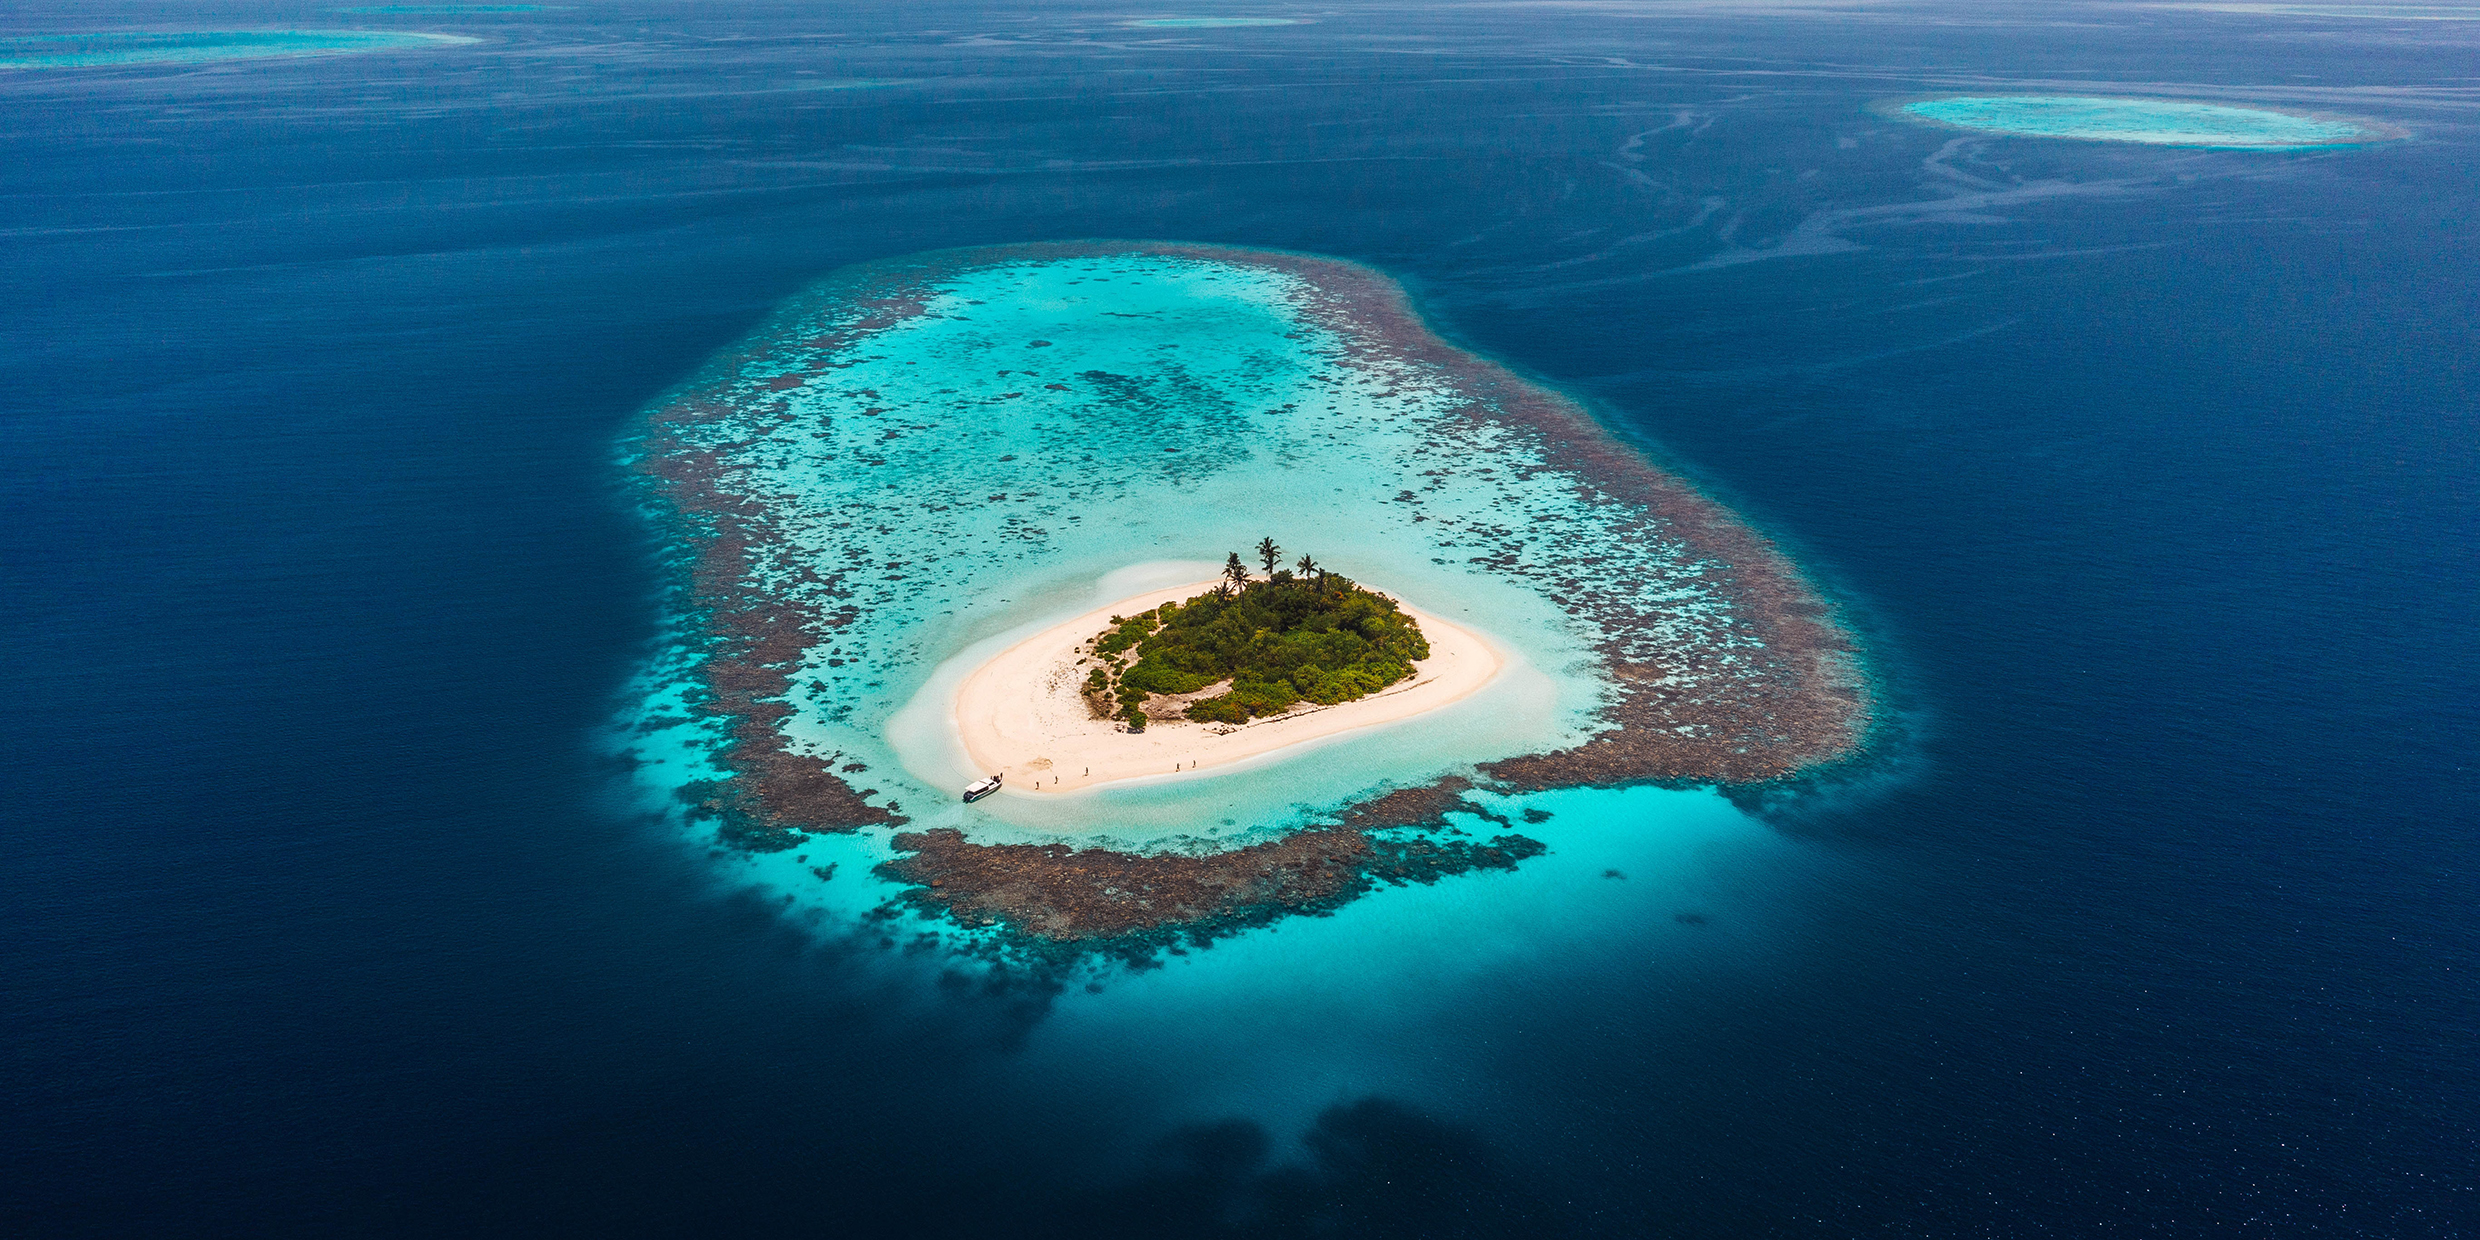 Aerial image of a deserted island in the ocean